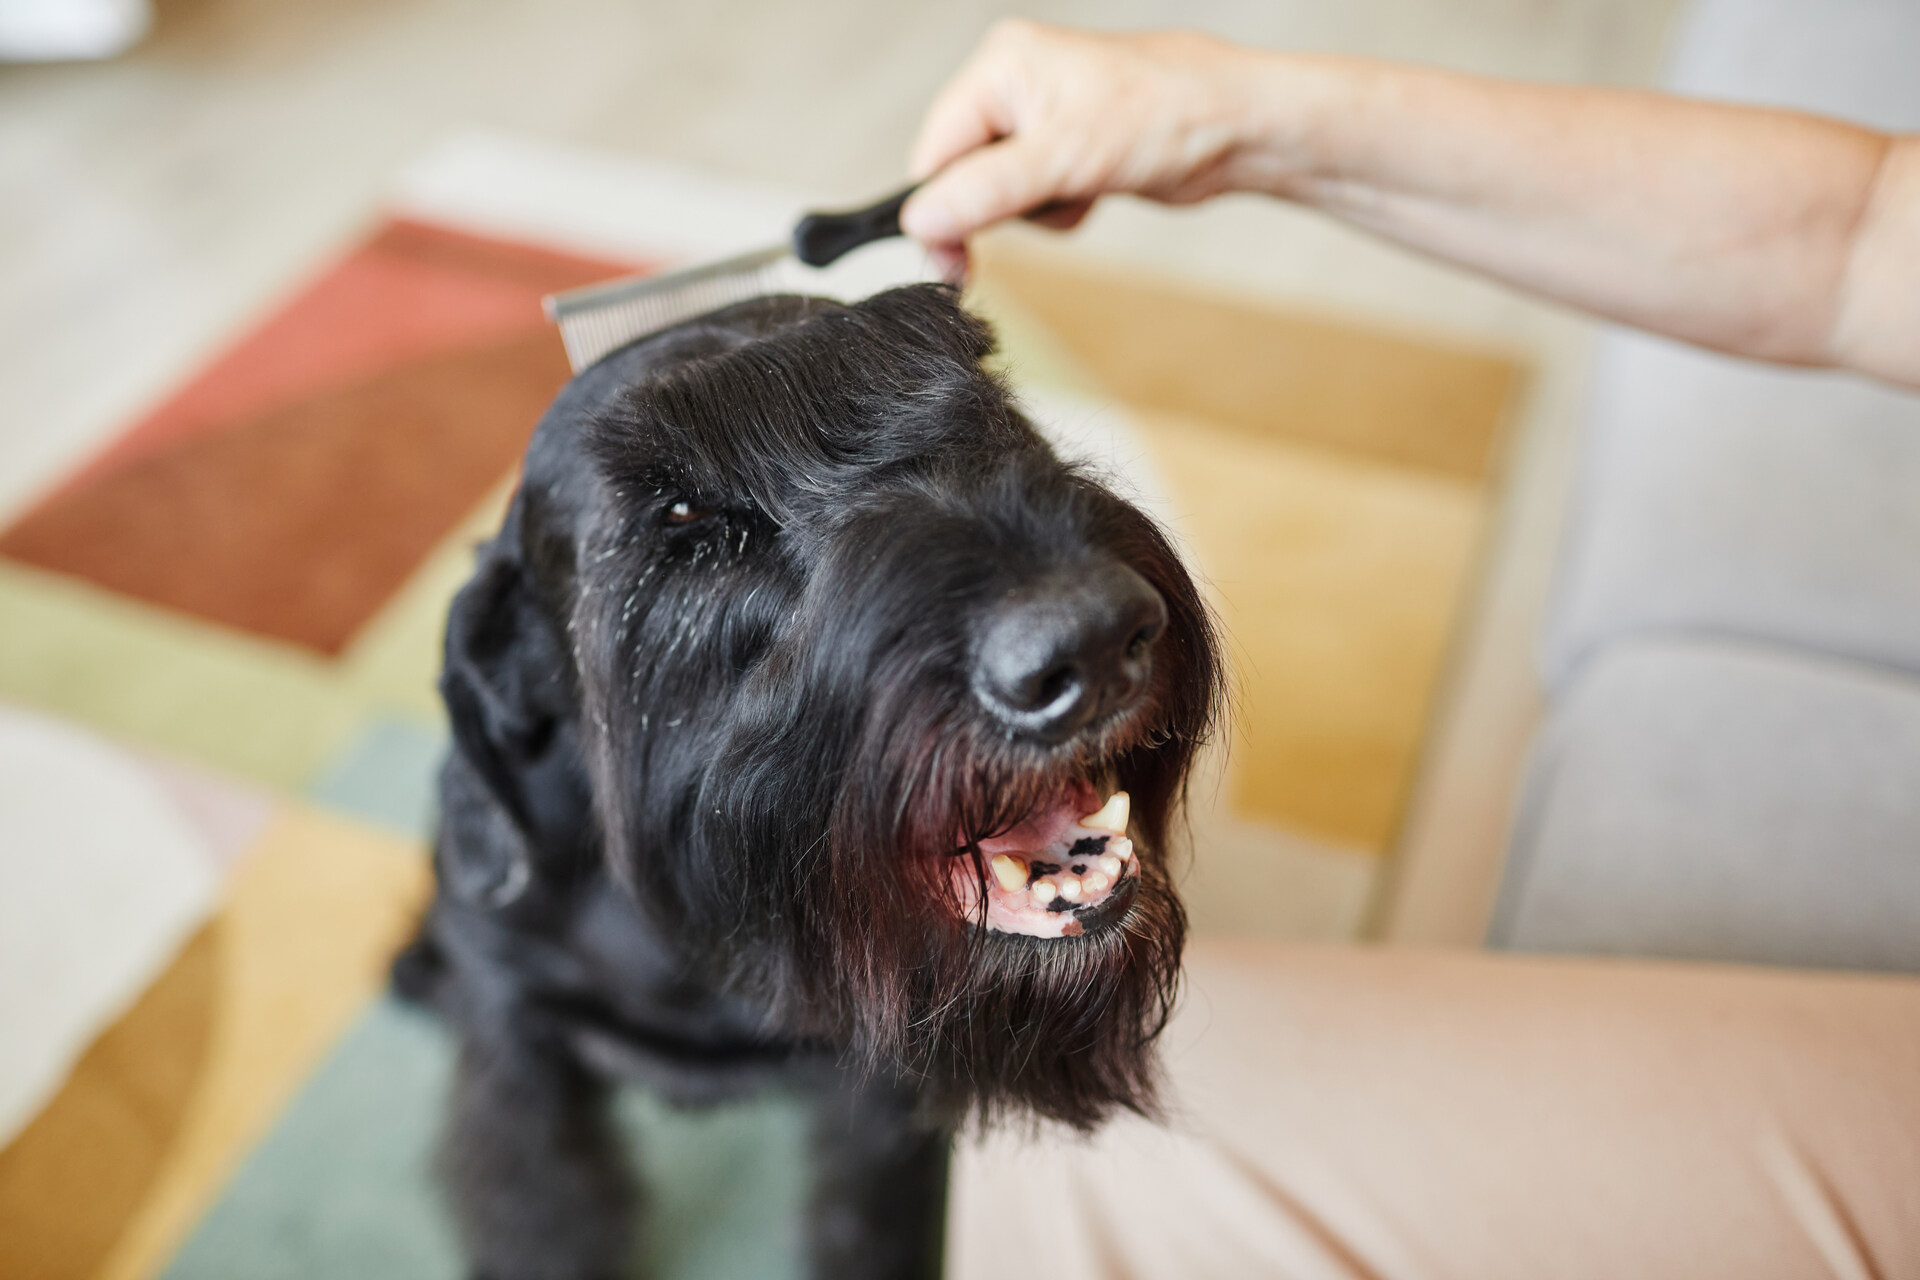 A man grooming a dog with a brush